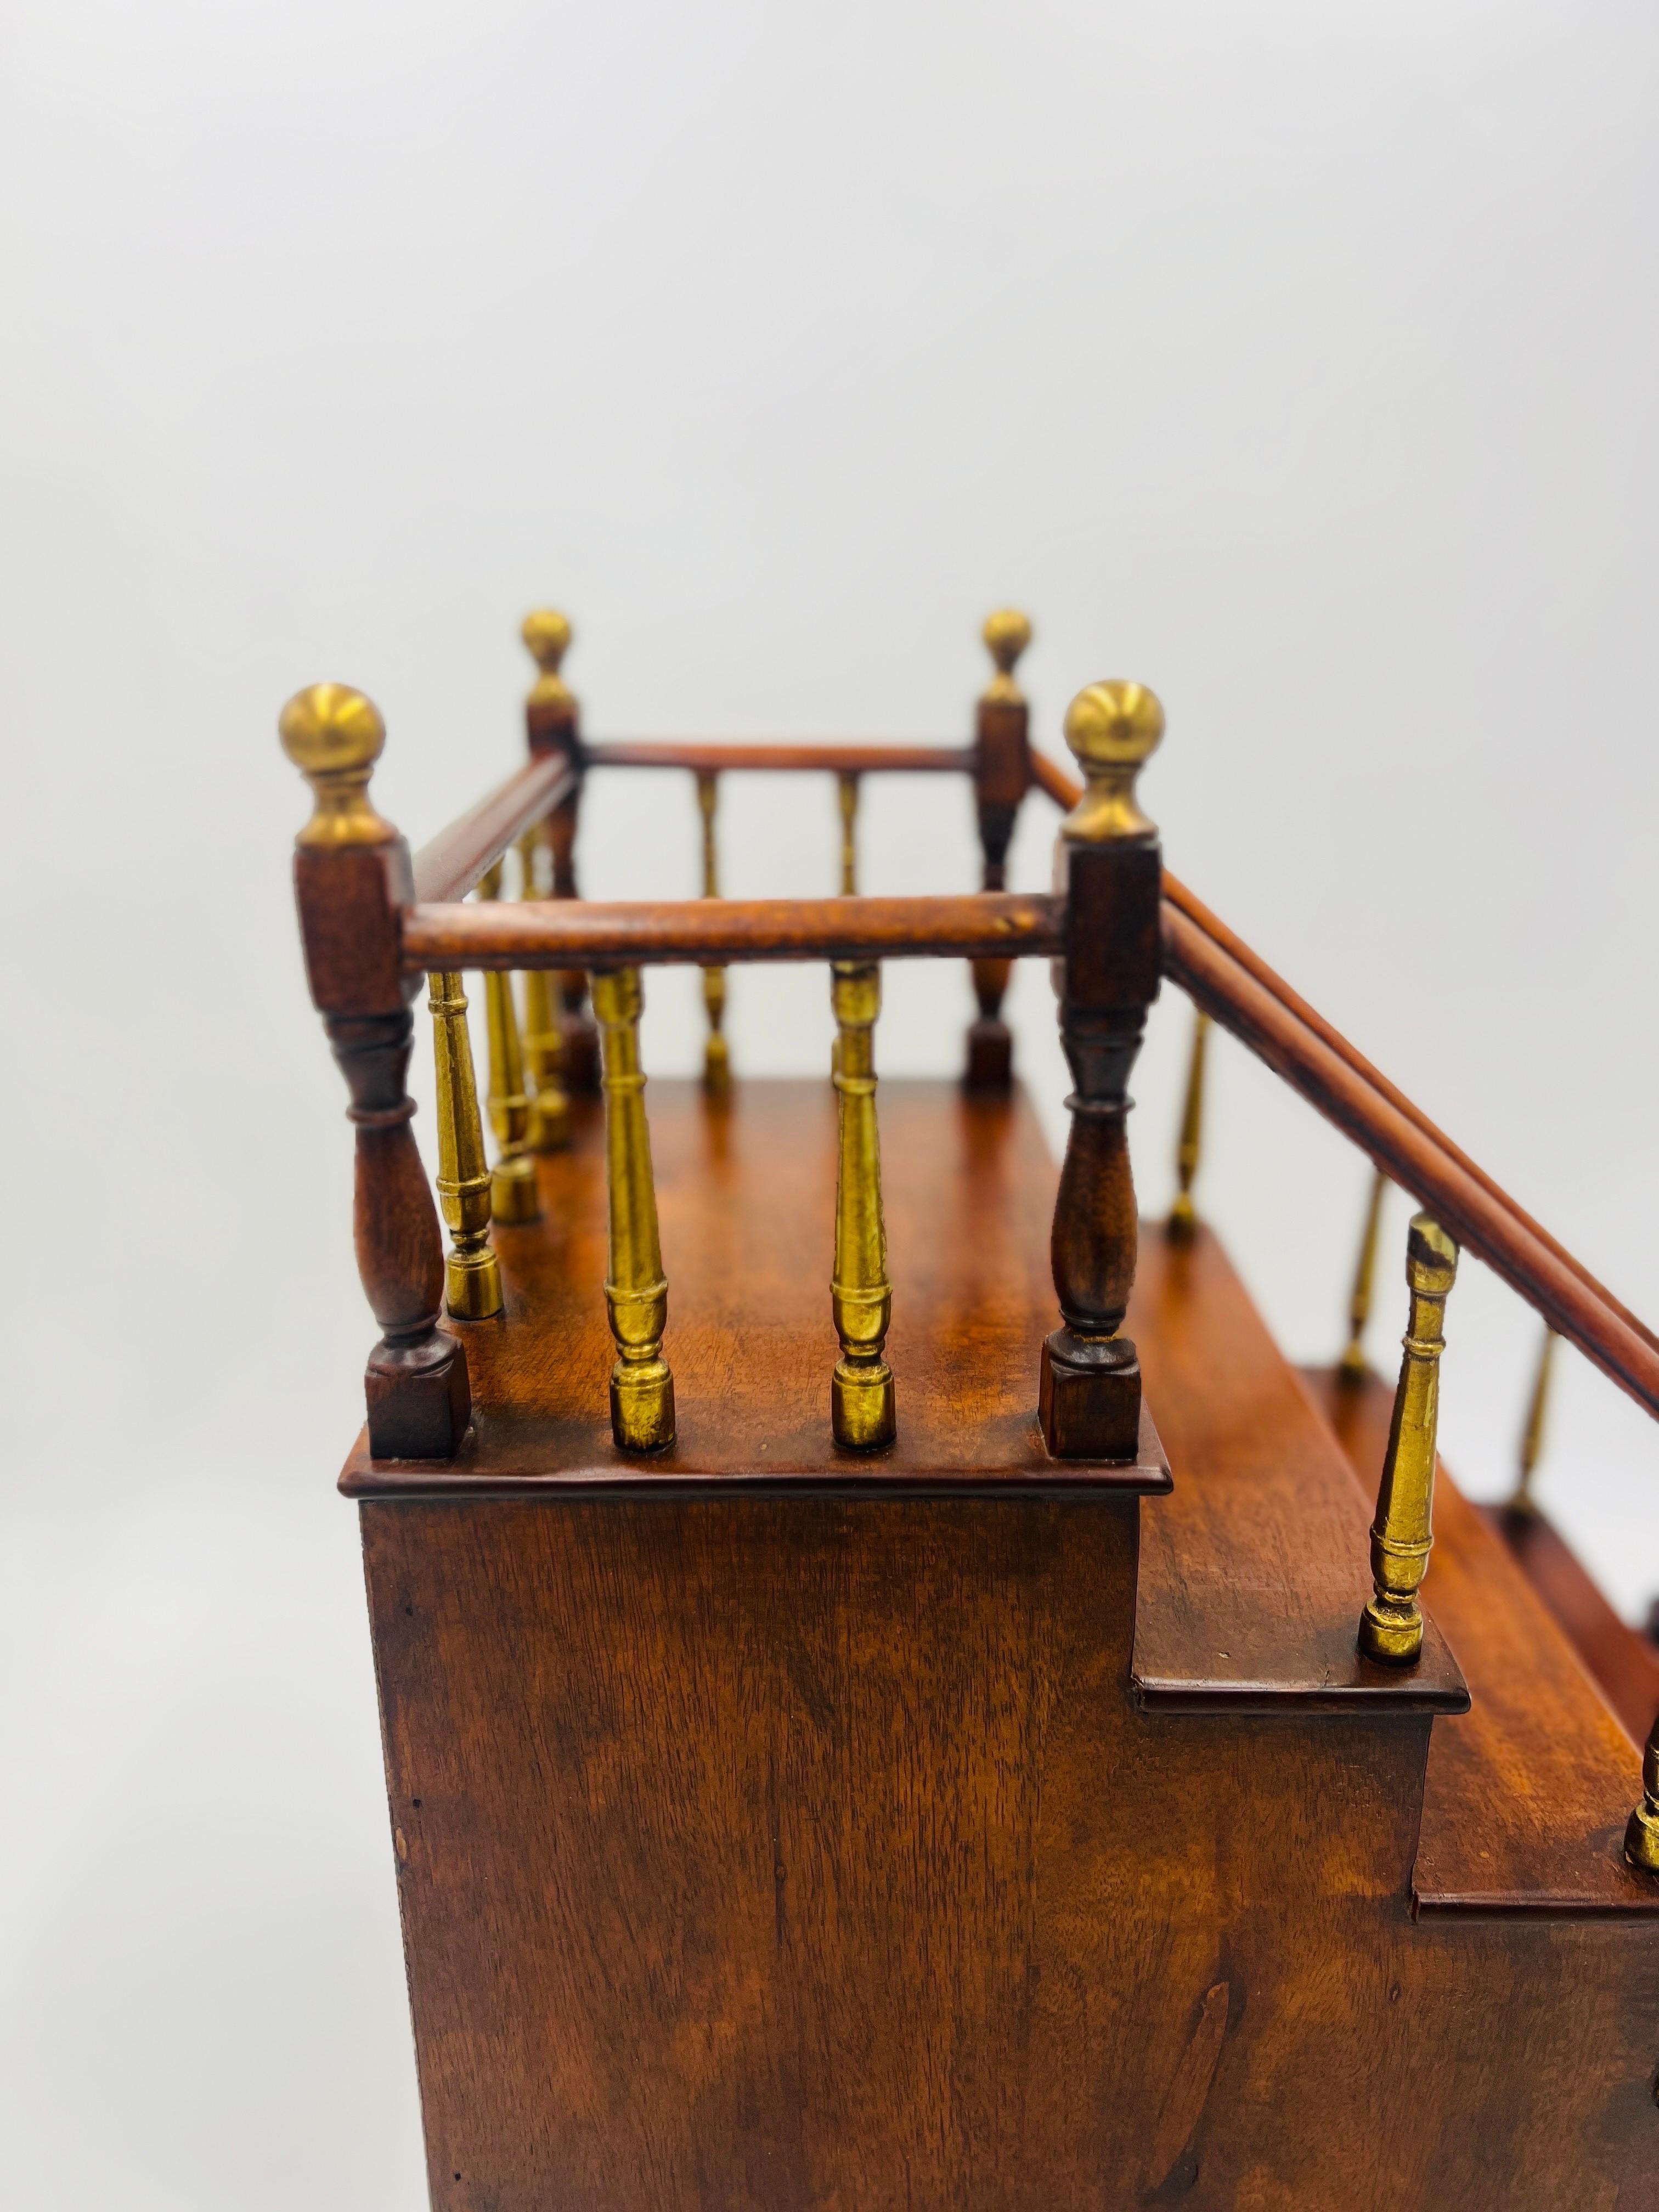 Antique Edwardian Mahogany Staircase Model with Brass Finial Newel Posts For Sale 4